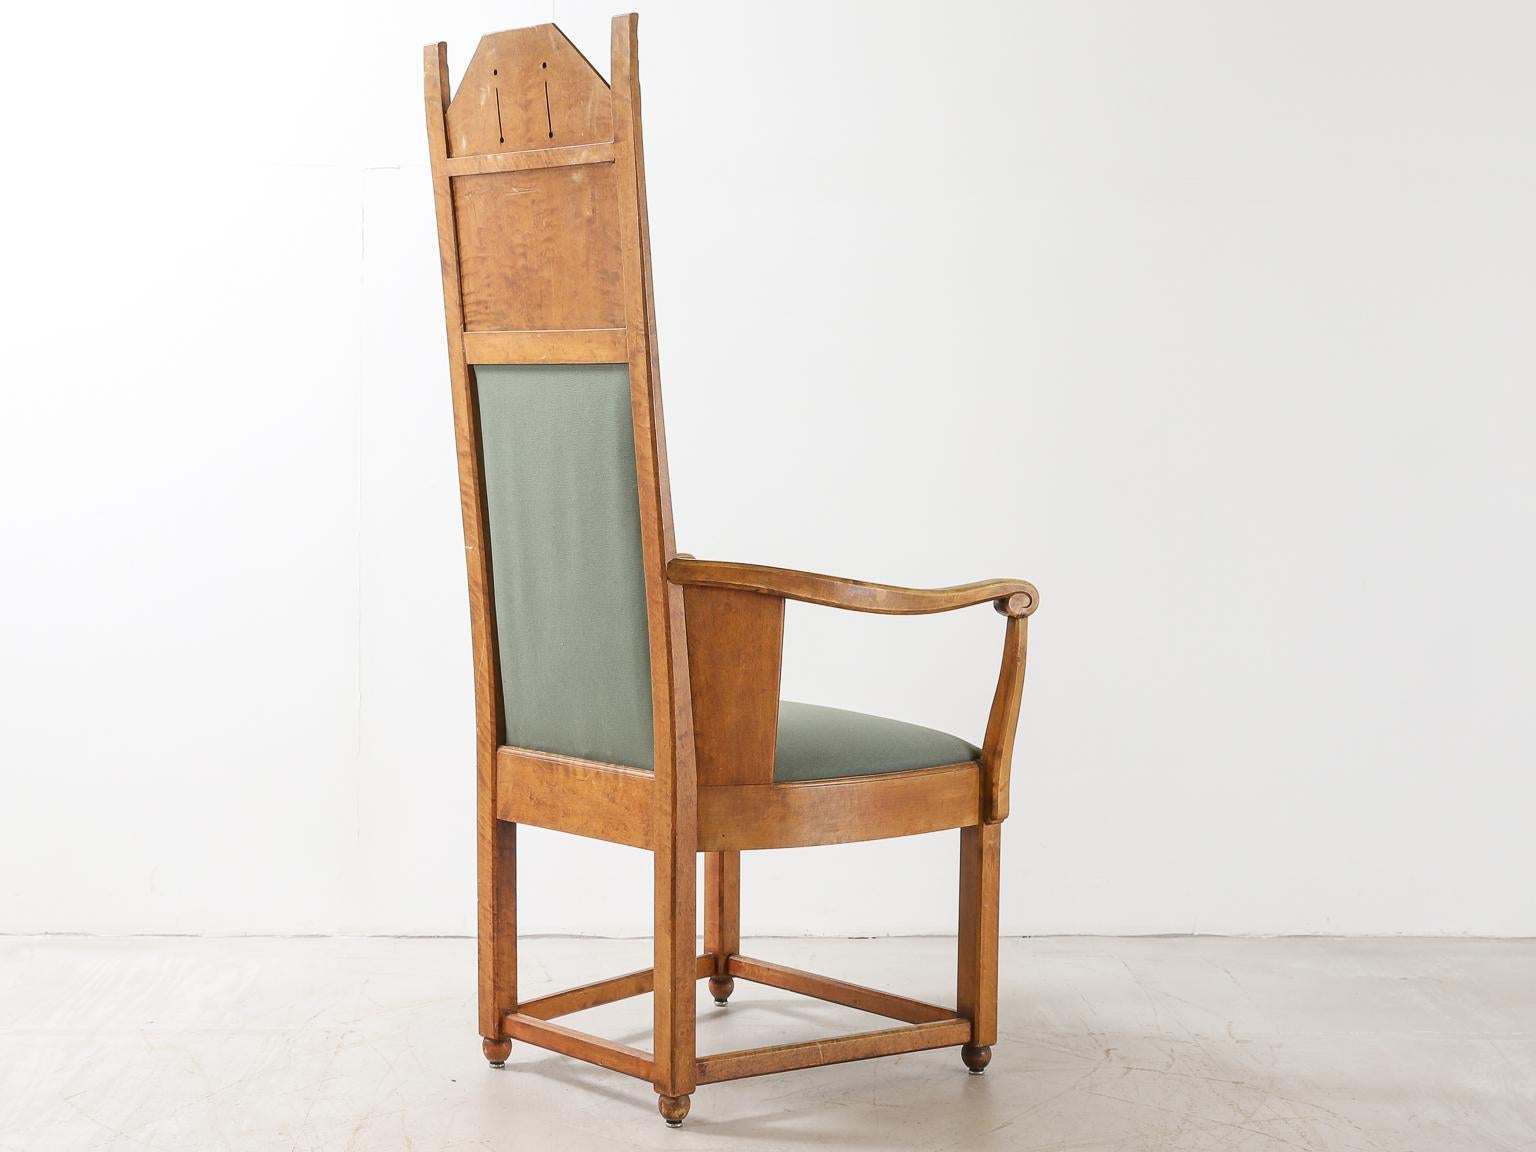 Carved Lars Israël Wahlman Swedish Arts & Crafts Armchair For Sale